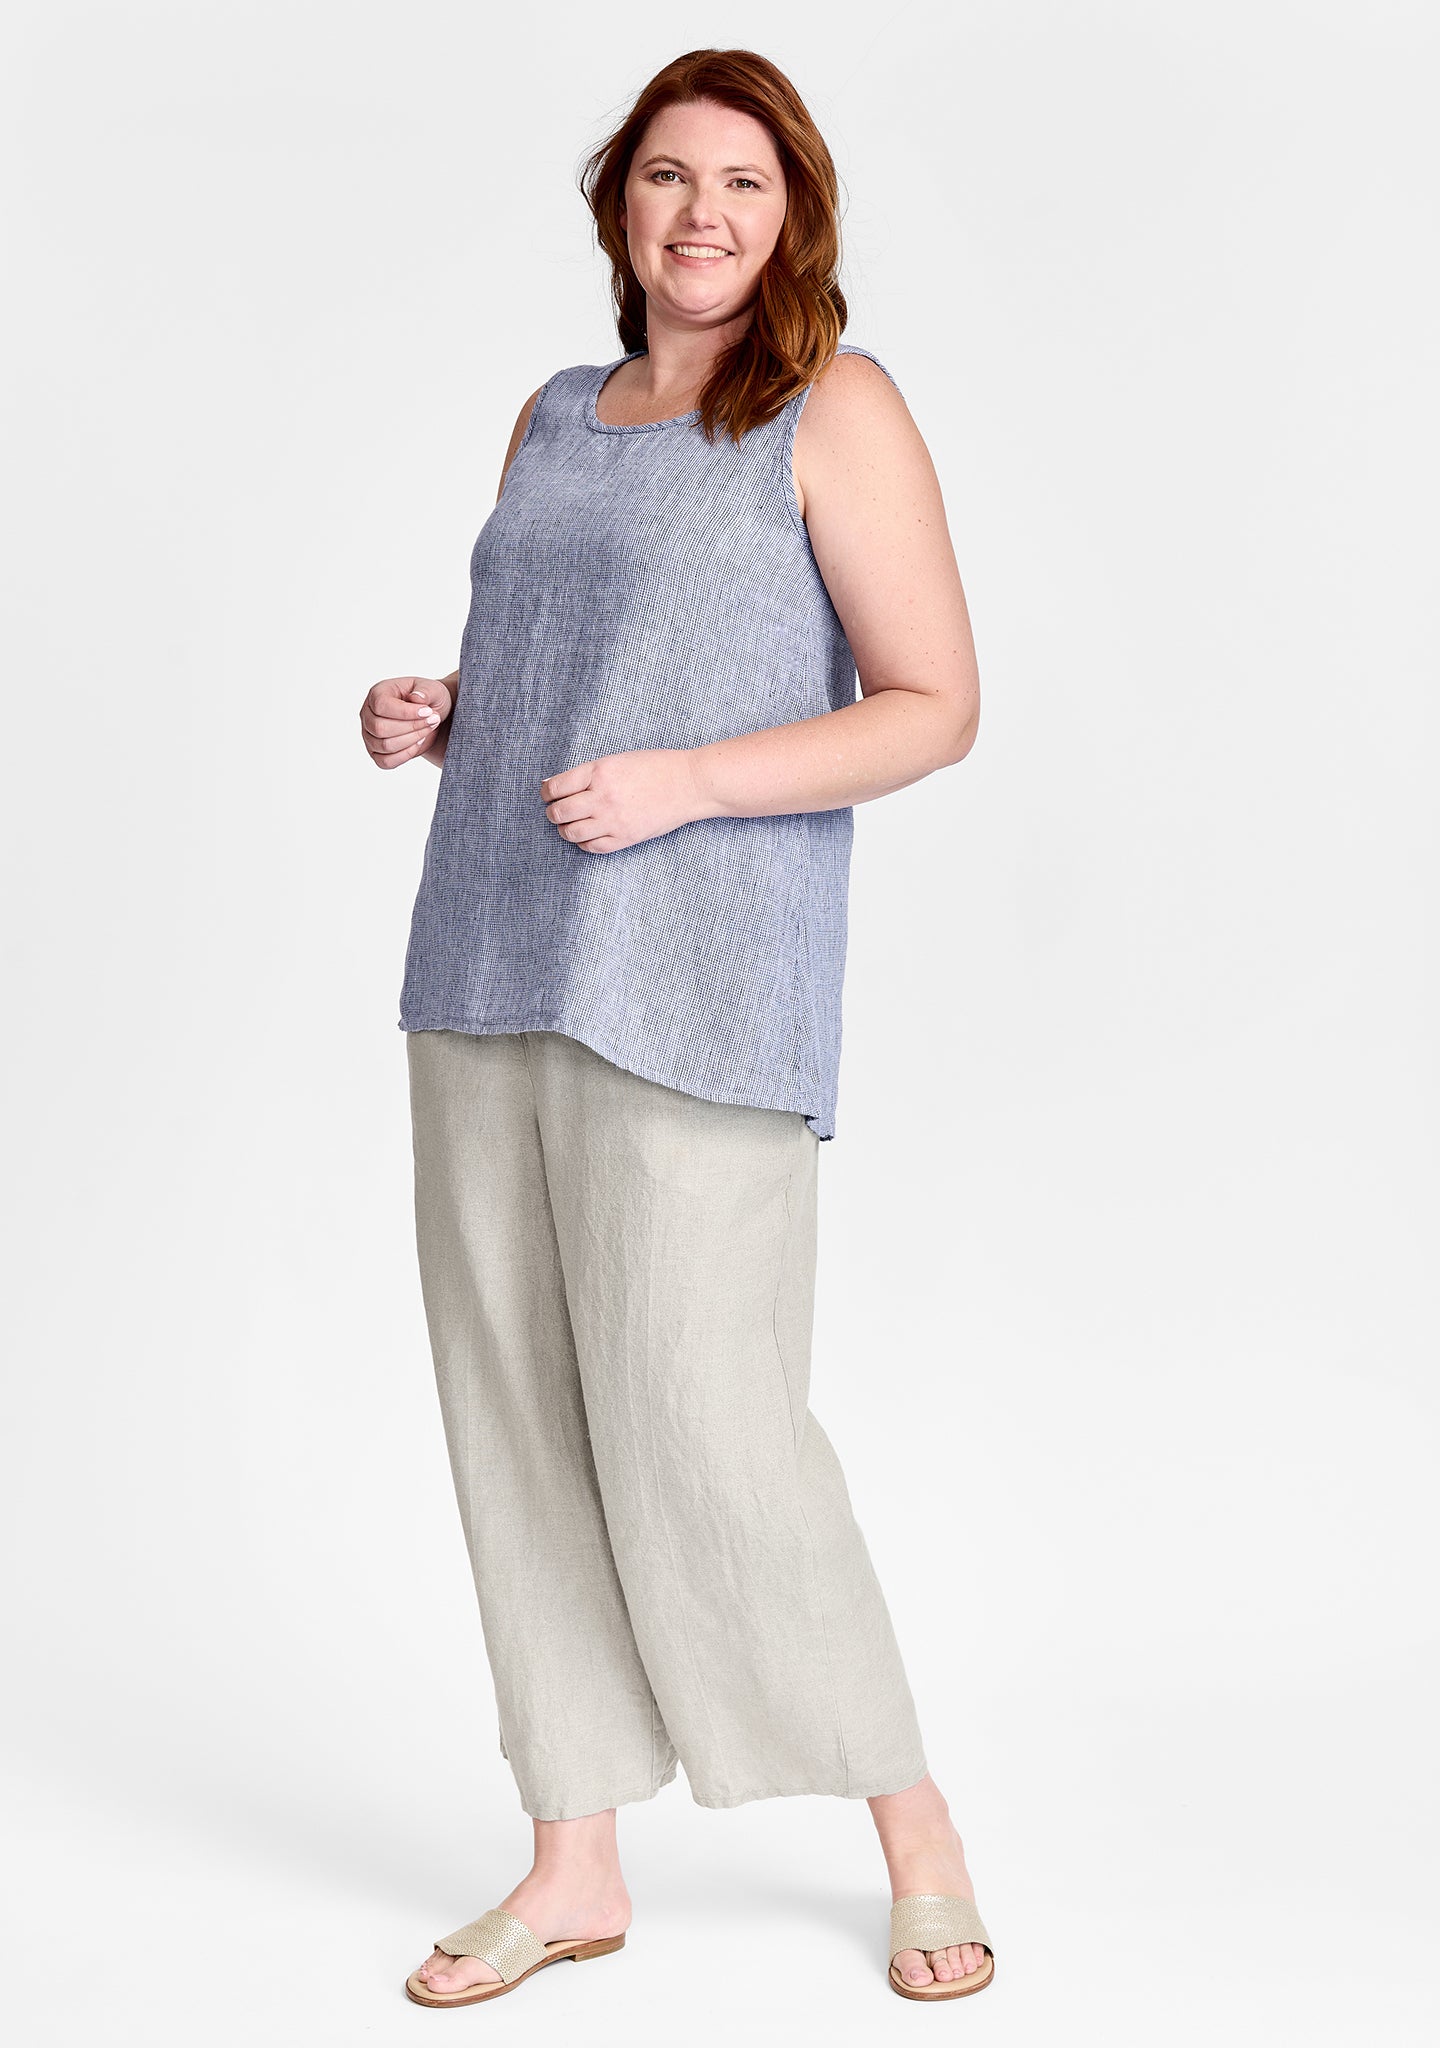 FLAX linen tank in blue with linen pants in natural